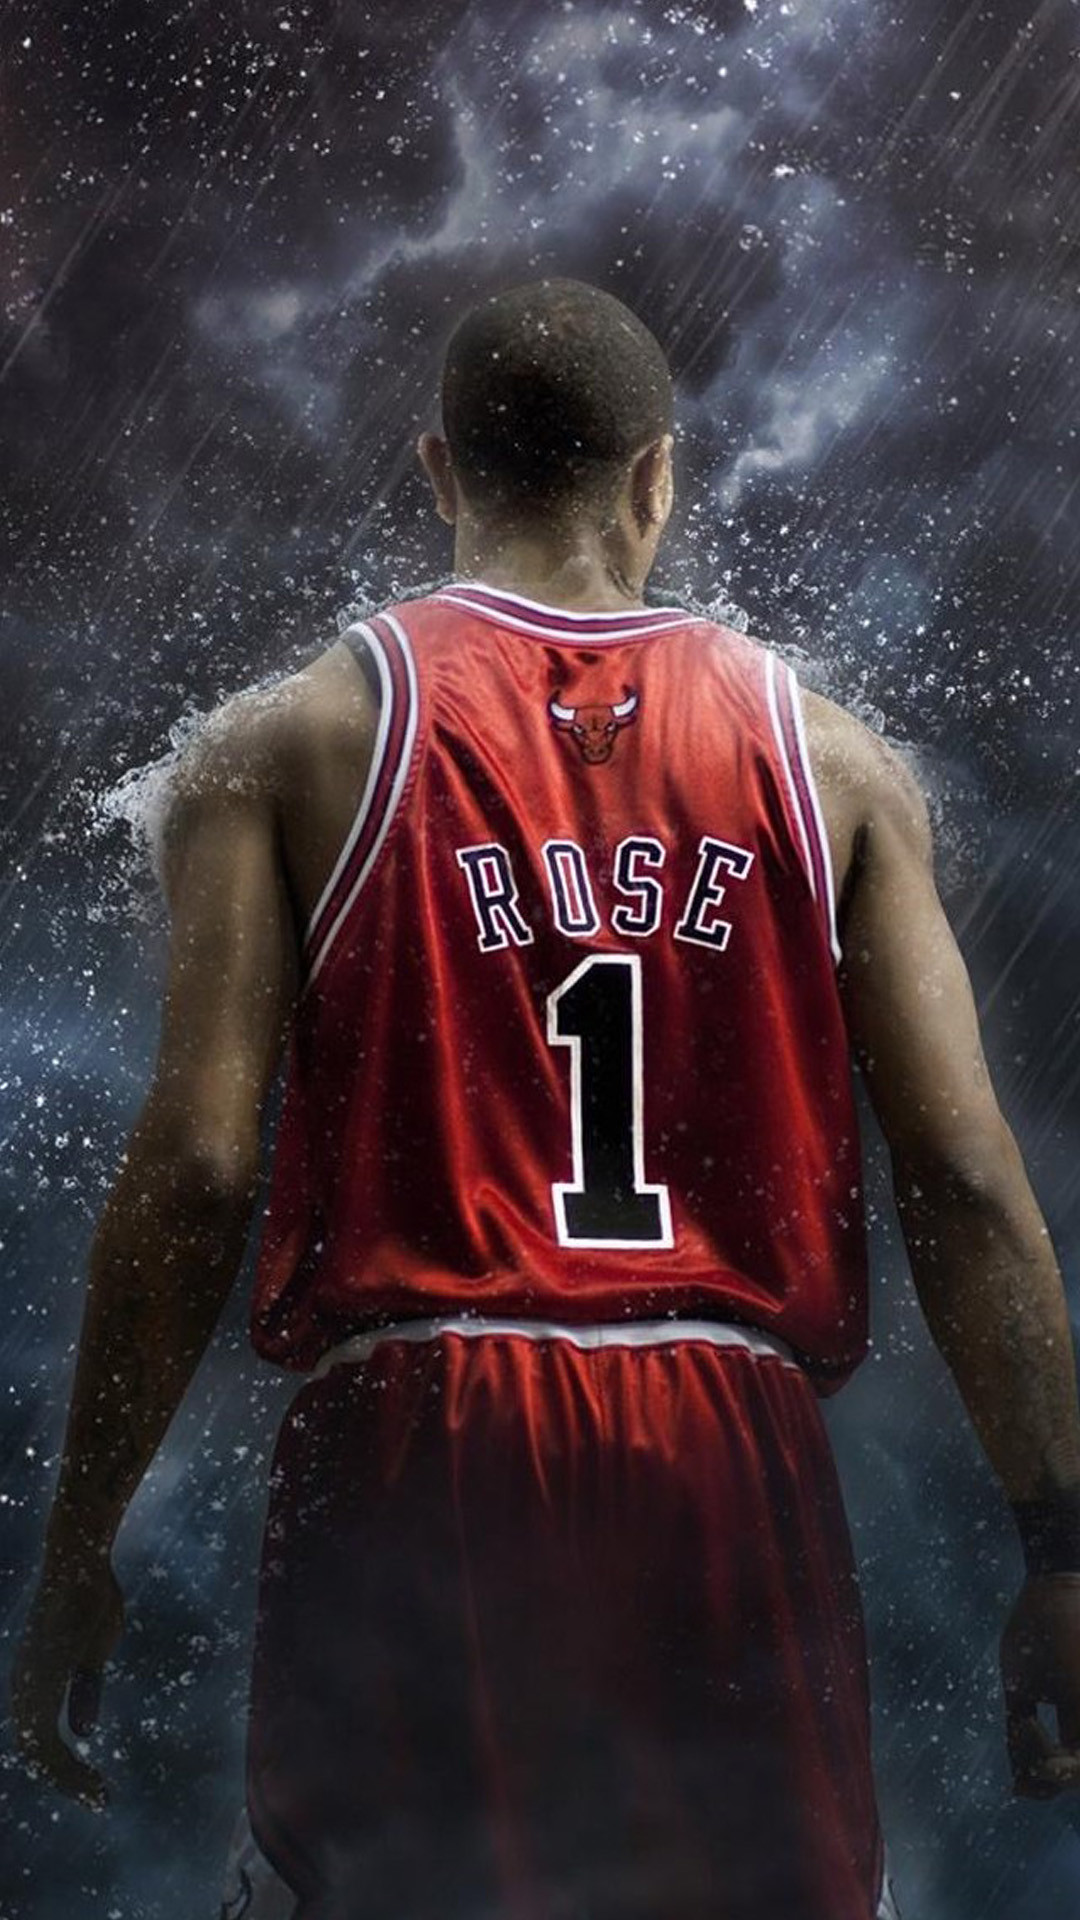 Cool nba wallpapers for iphone